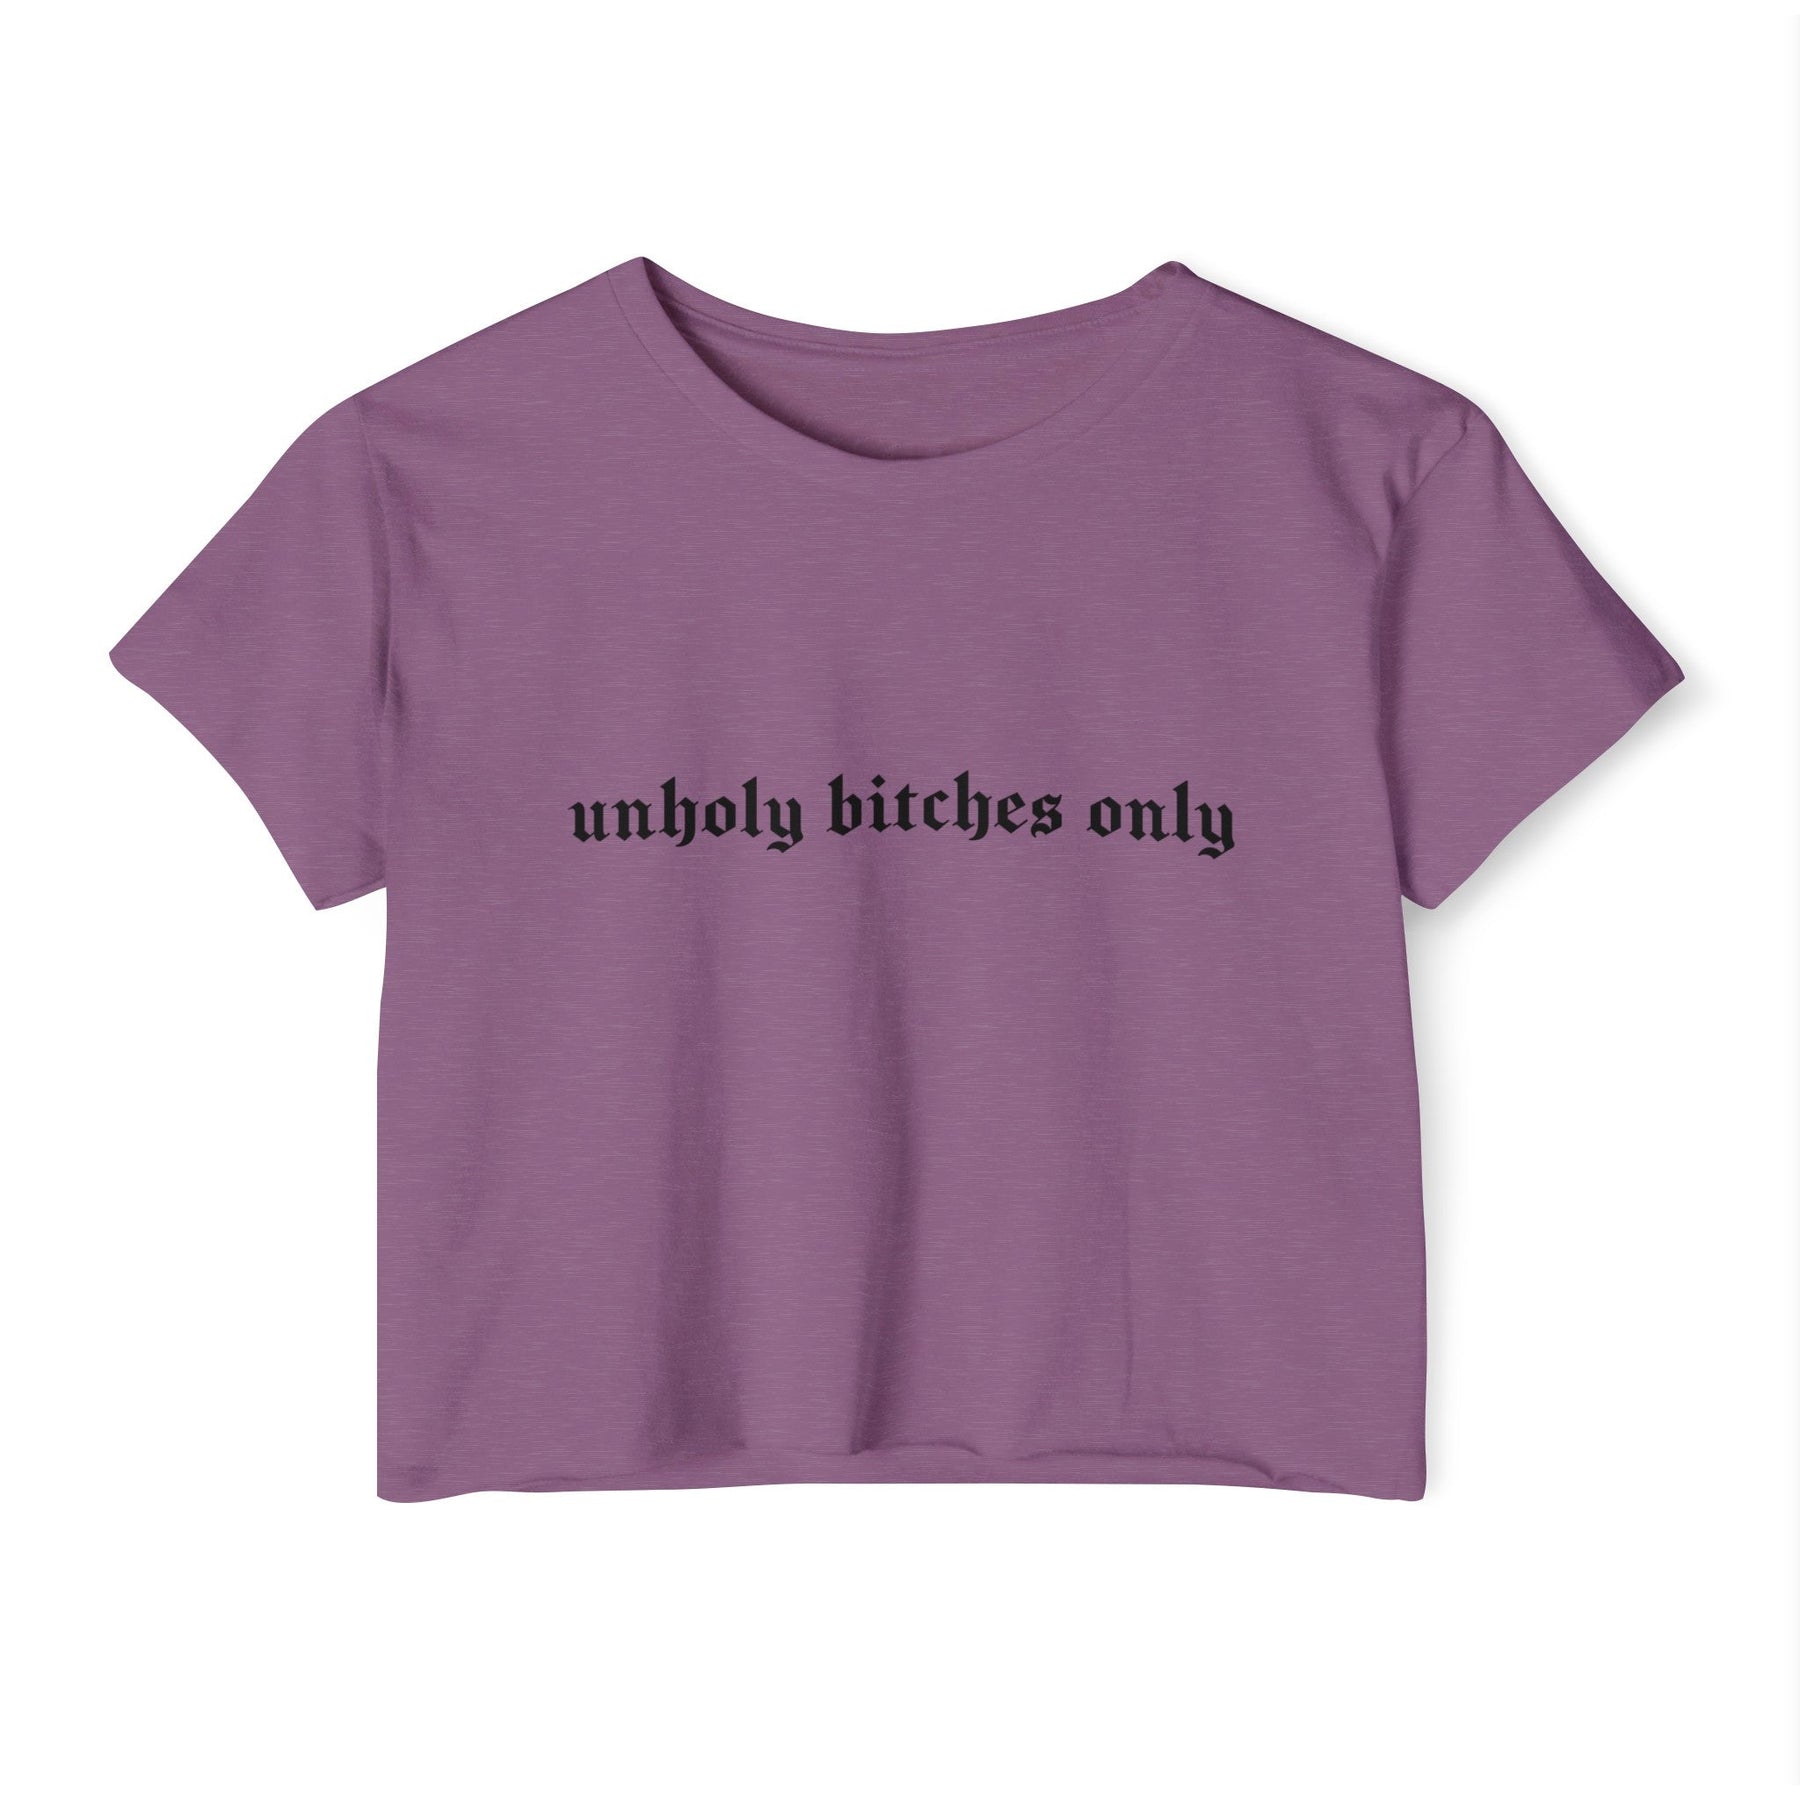 Unholy Bitches Only Women's Lightweight Crop Top - Goth Cloth Co.T - Shirt13167499156281286164